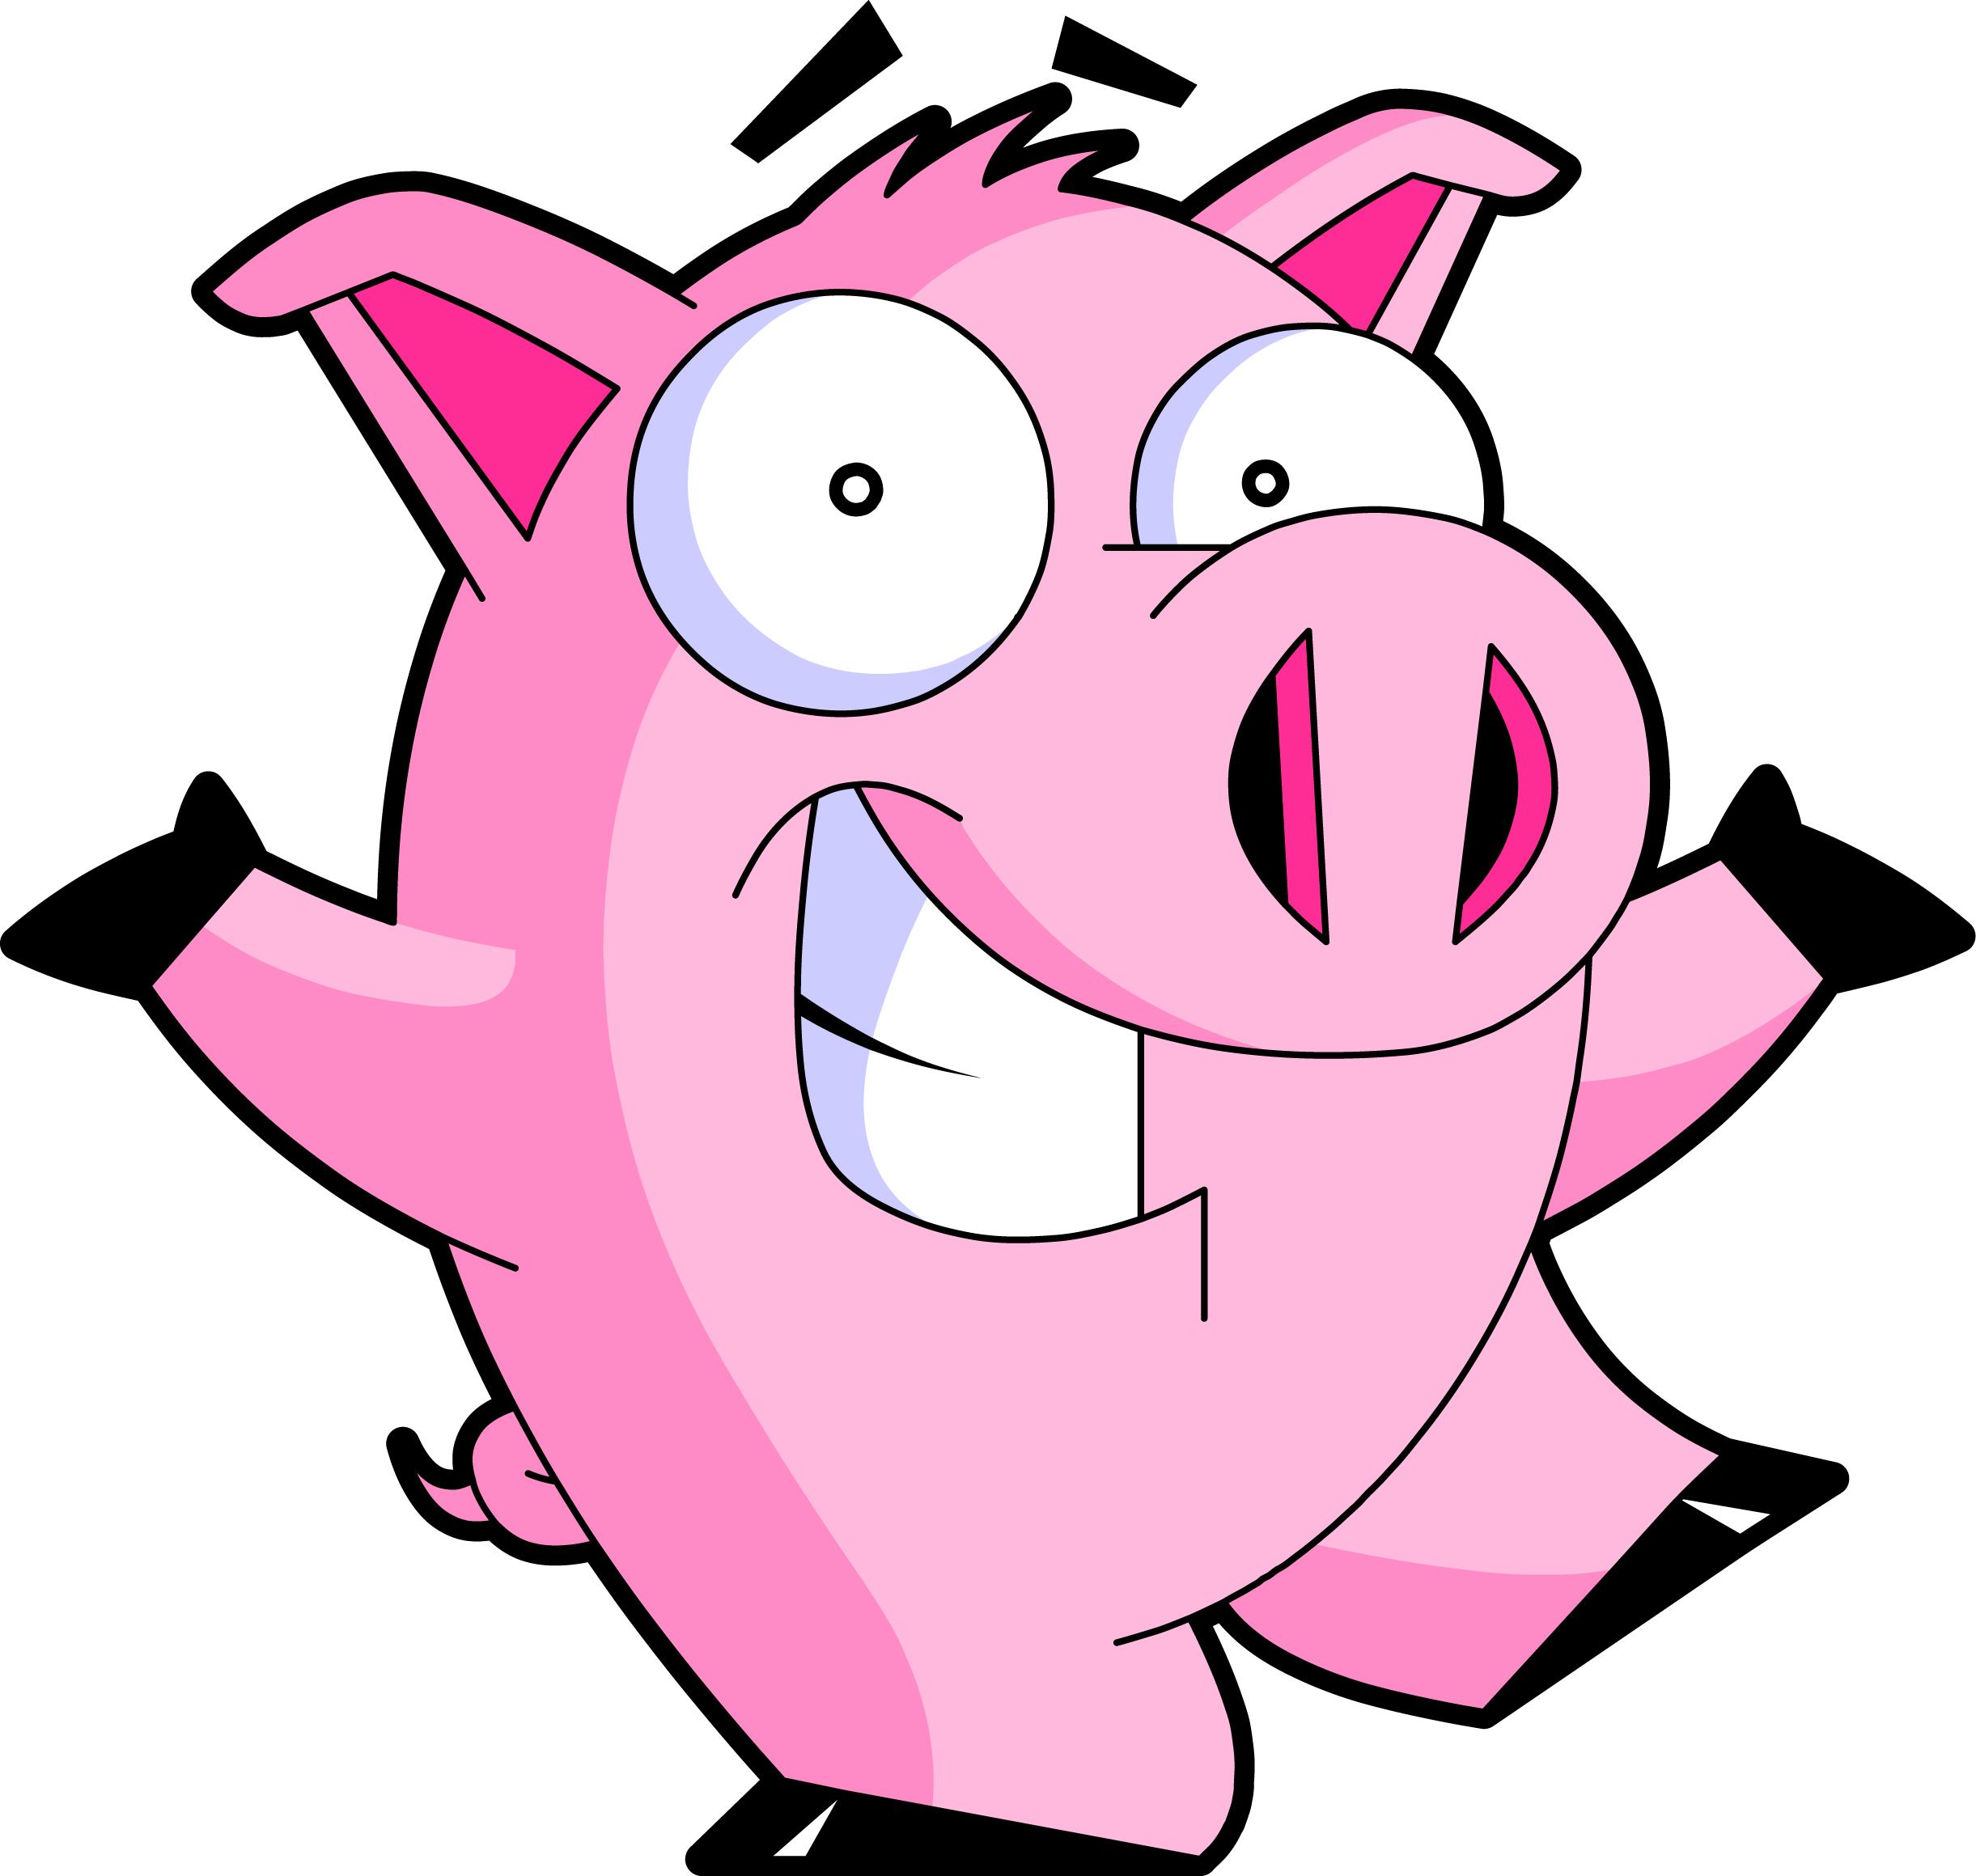 I am the online version of Swine Flu. My goal is to infect as many people as I can. Will you catch SwineOnline? For entertainment purposes only.